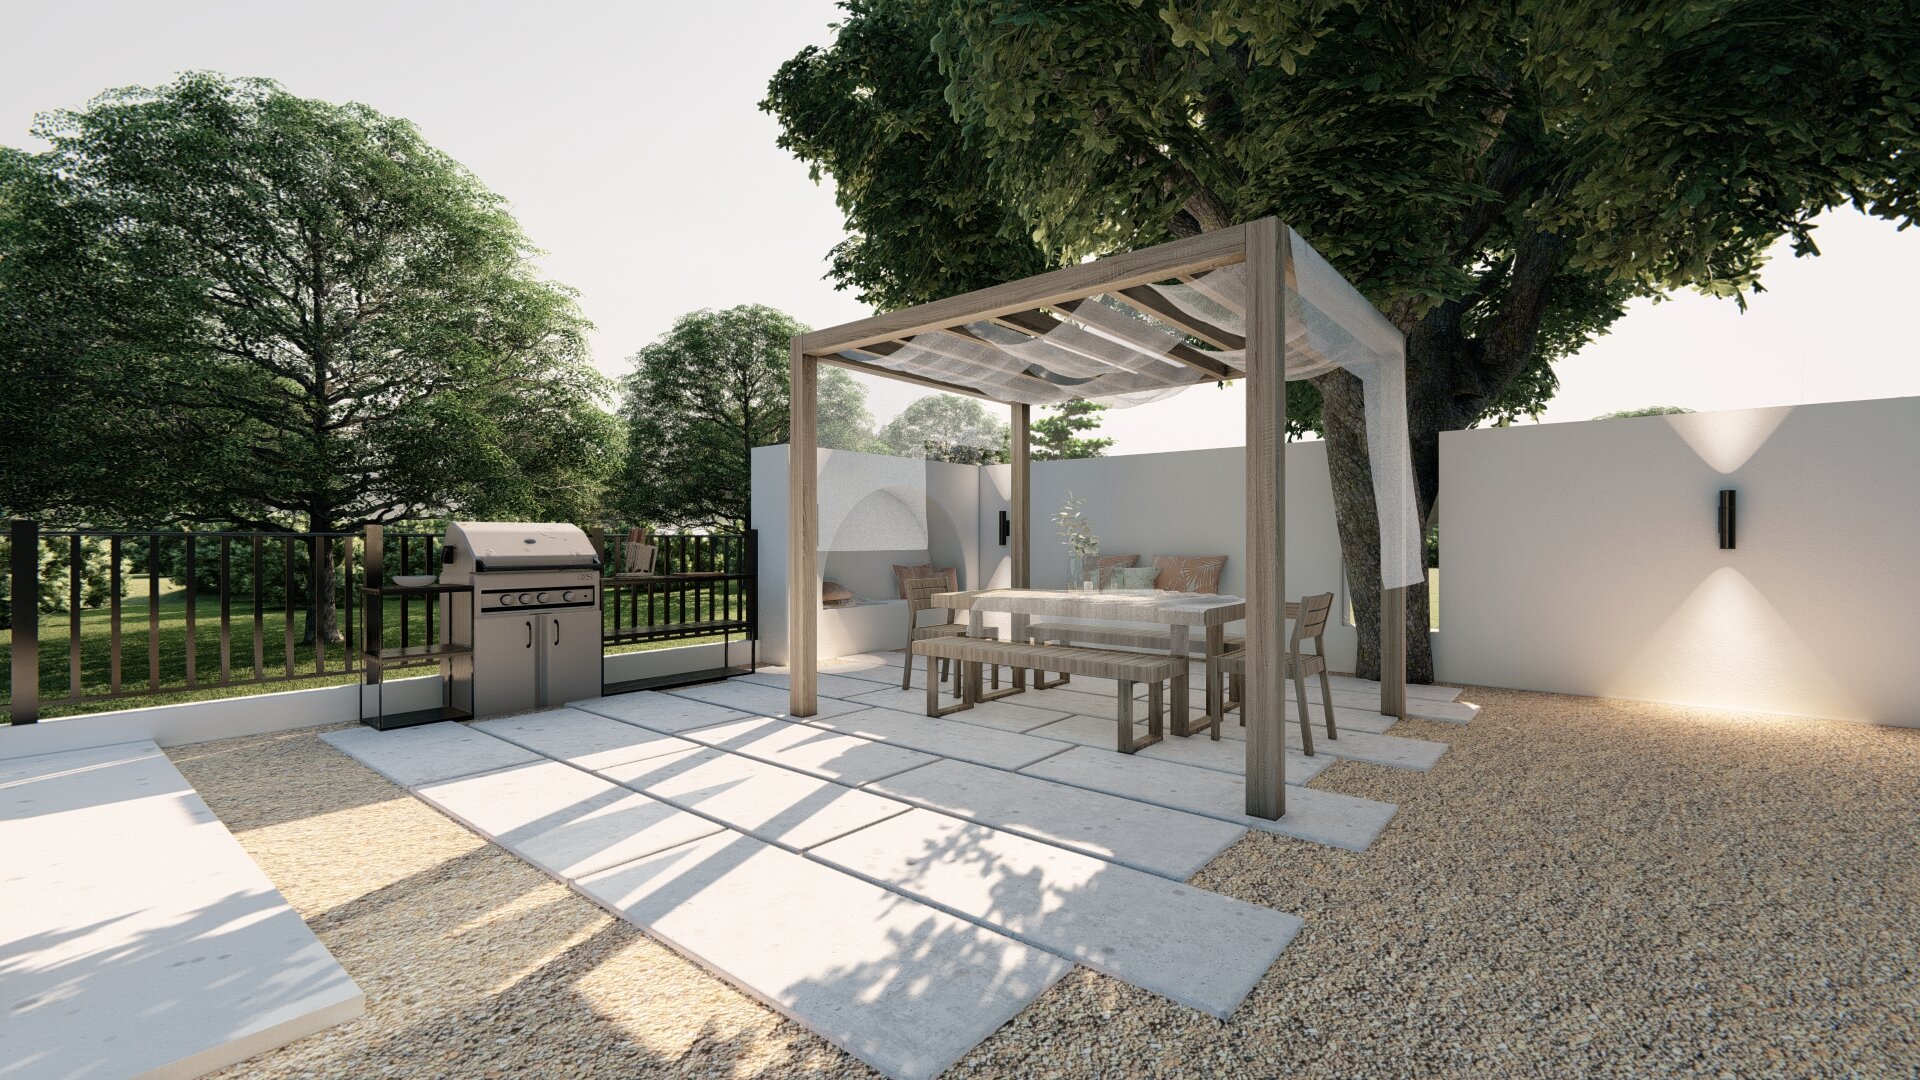 Outdoor lounge area with built in seating and pergola near bbq station